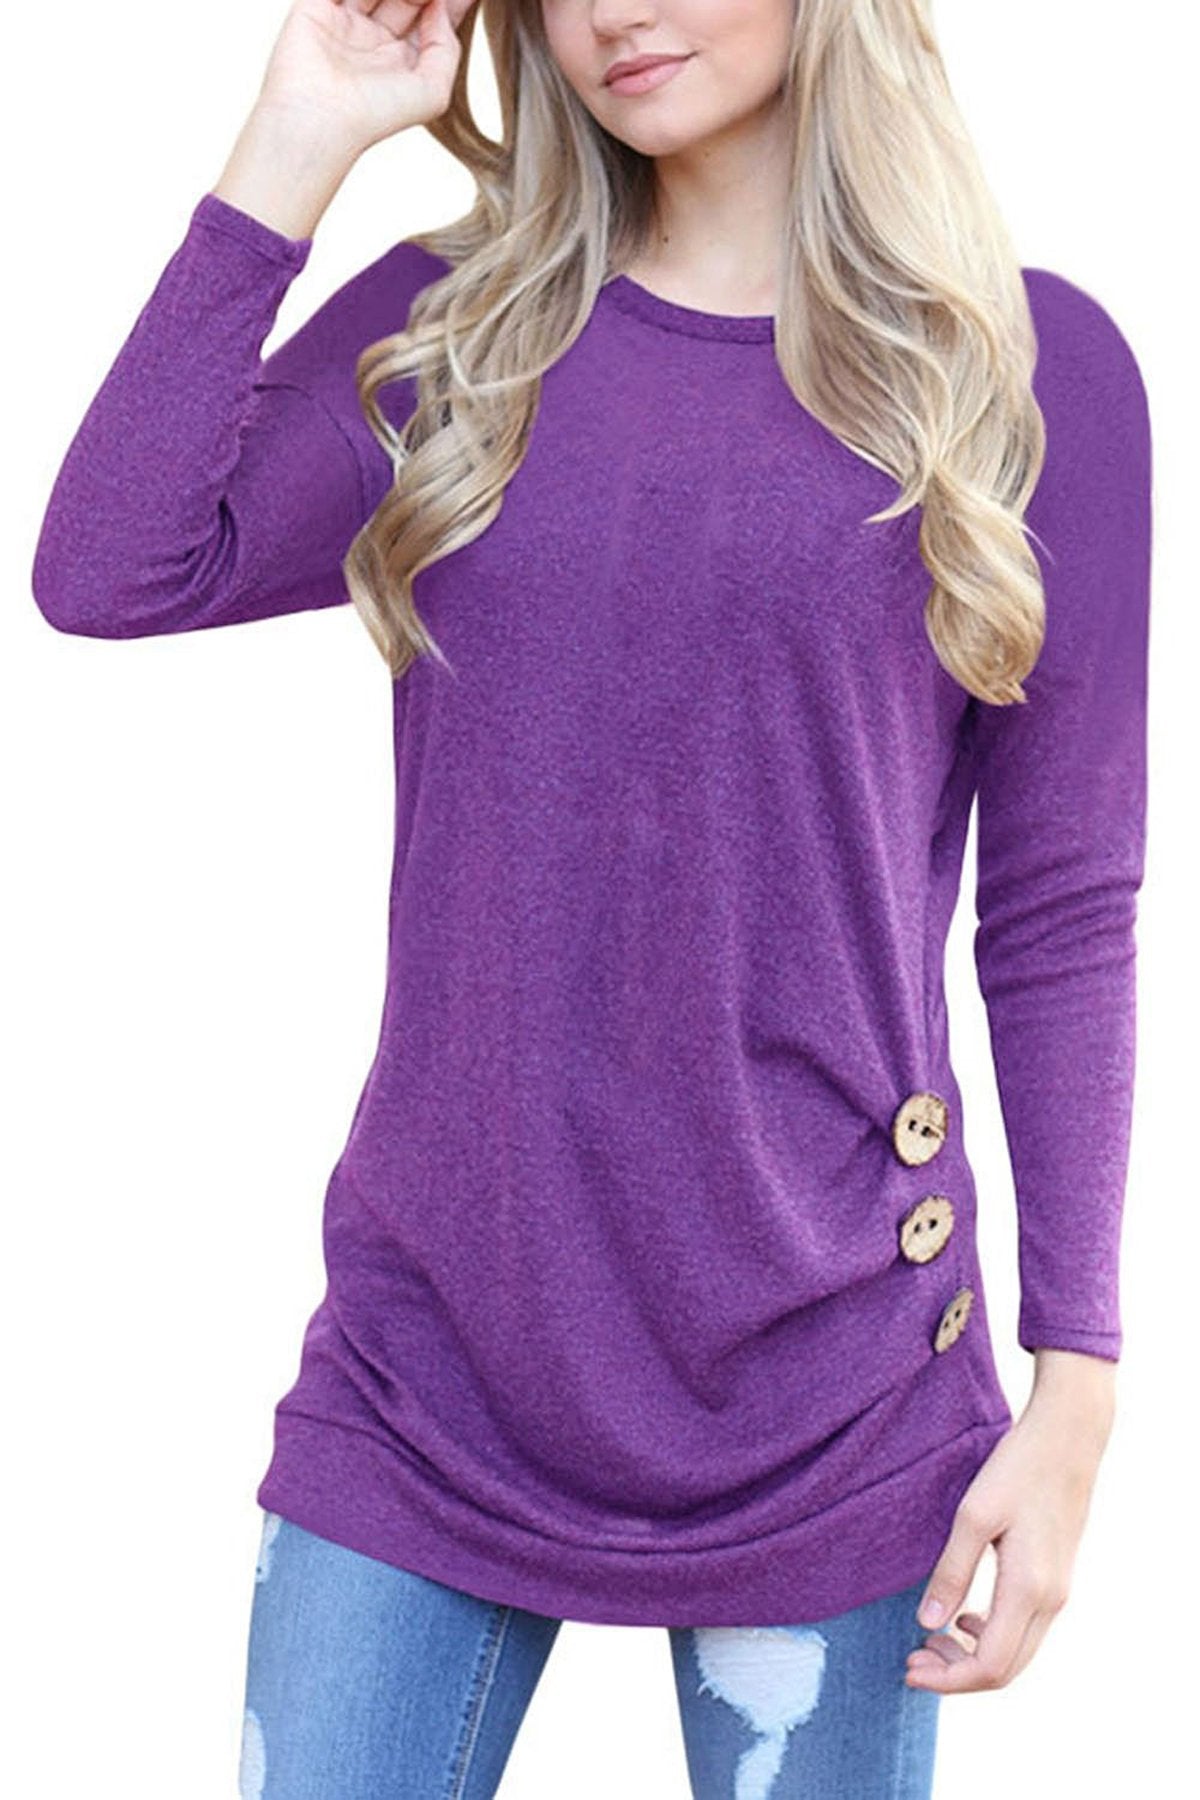 Candy Color Round Neck Long Sleeves Button T-shirt